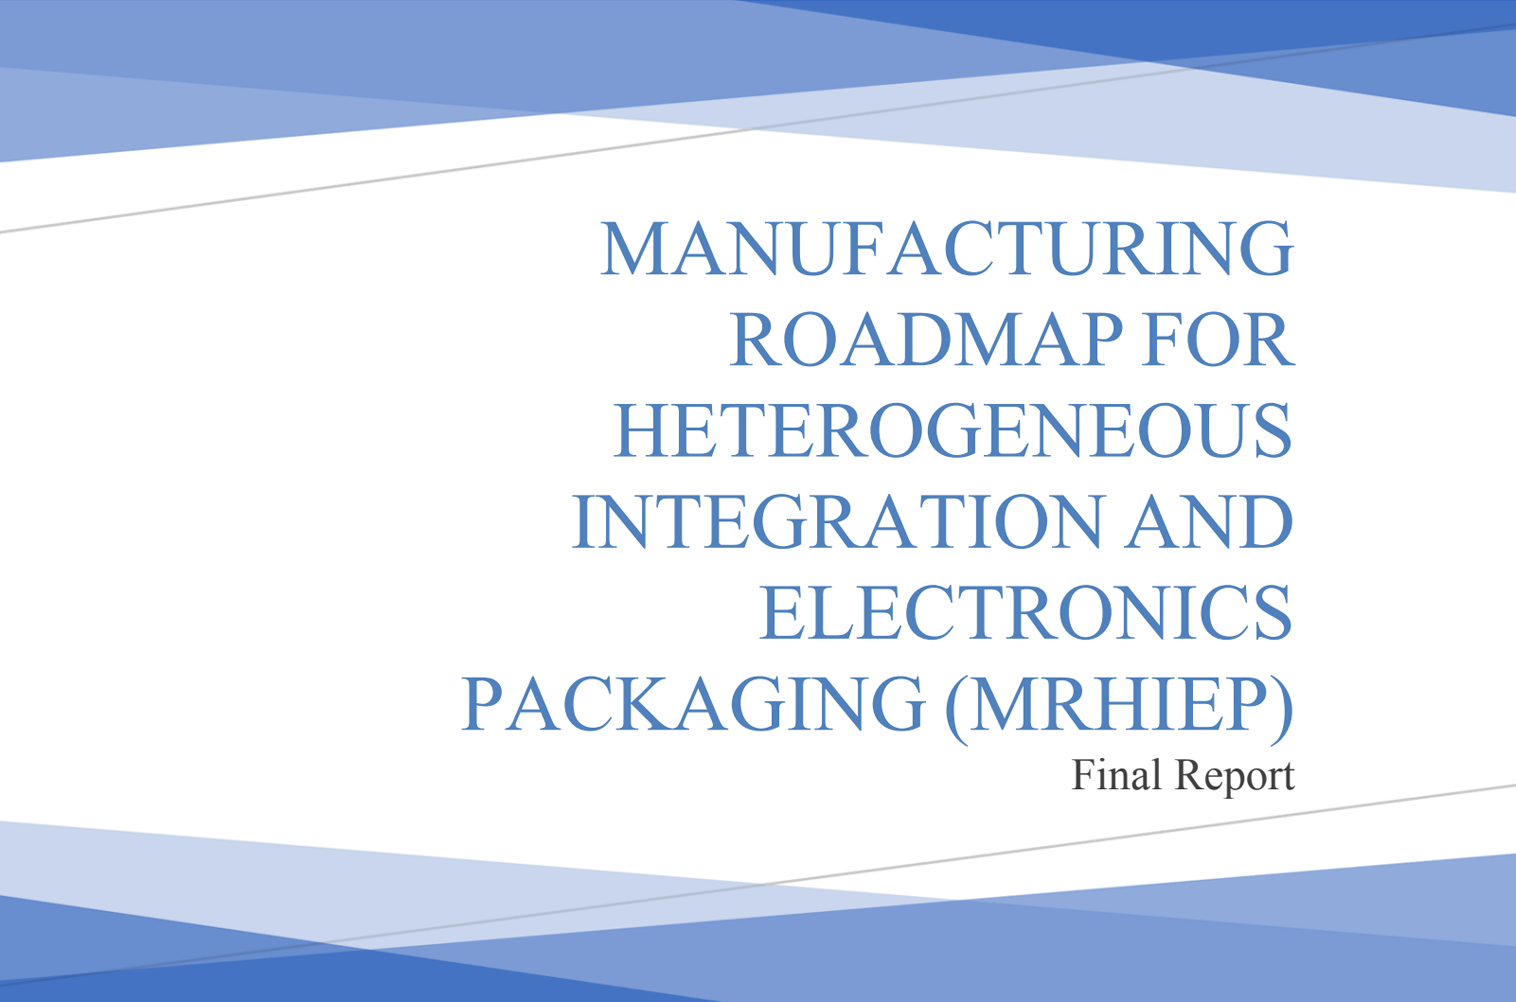 UCLA CHIPS and SEMI Release Manufacturing Roadmap for Heterogeneous Integration and Electronics Packaging (MRHIEP) Report